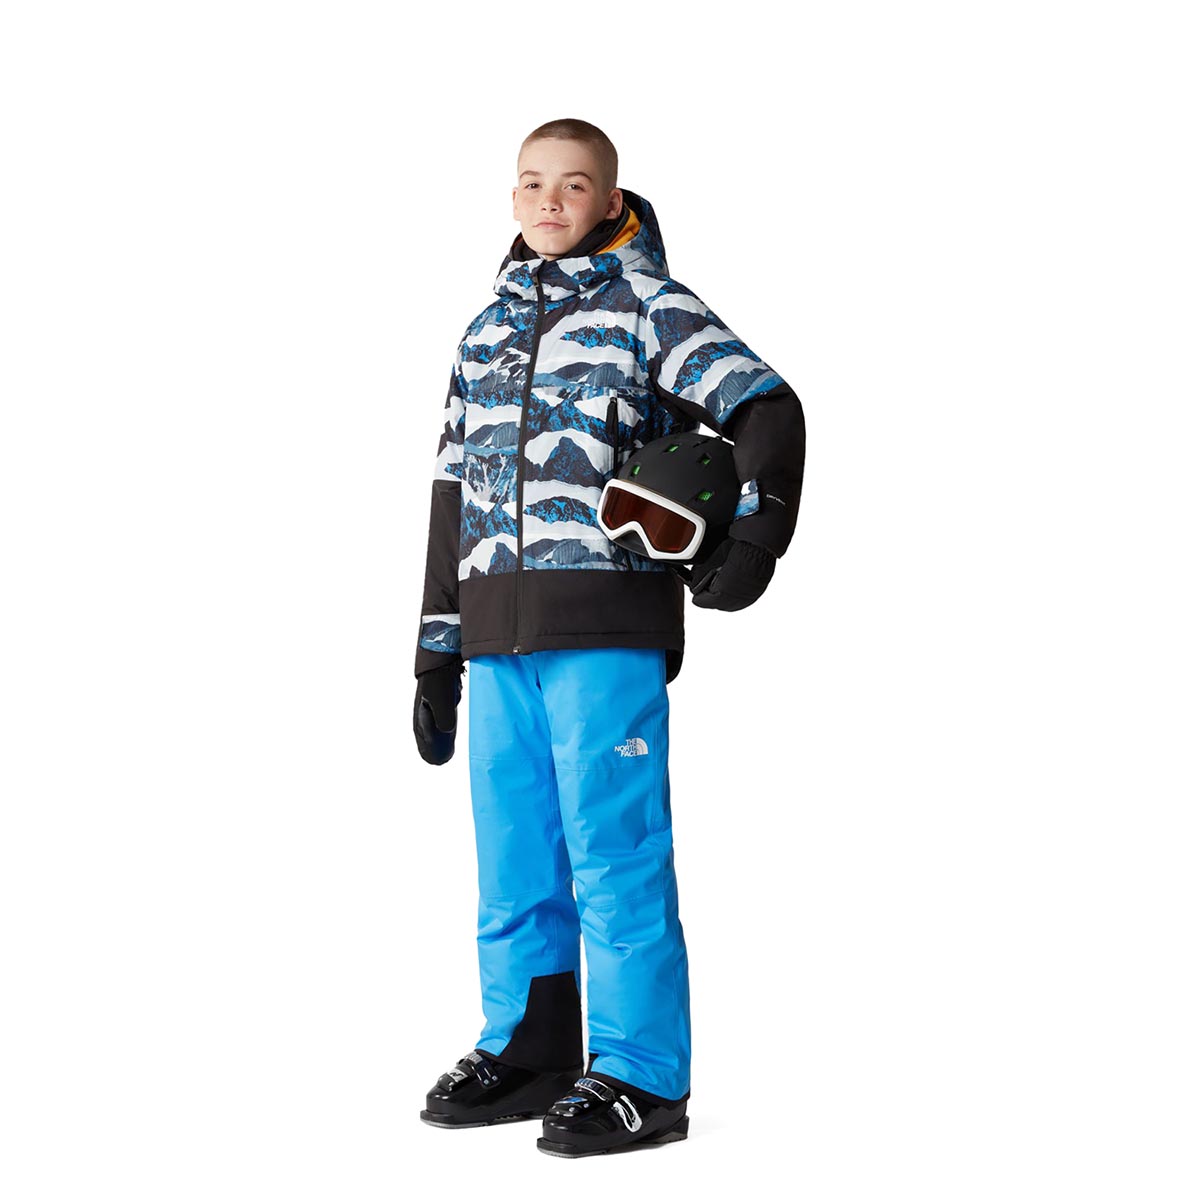 THE NORTH FACE - BOYS FREEDOM INSULATED TROUSERS